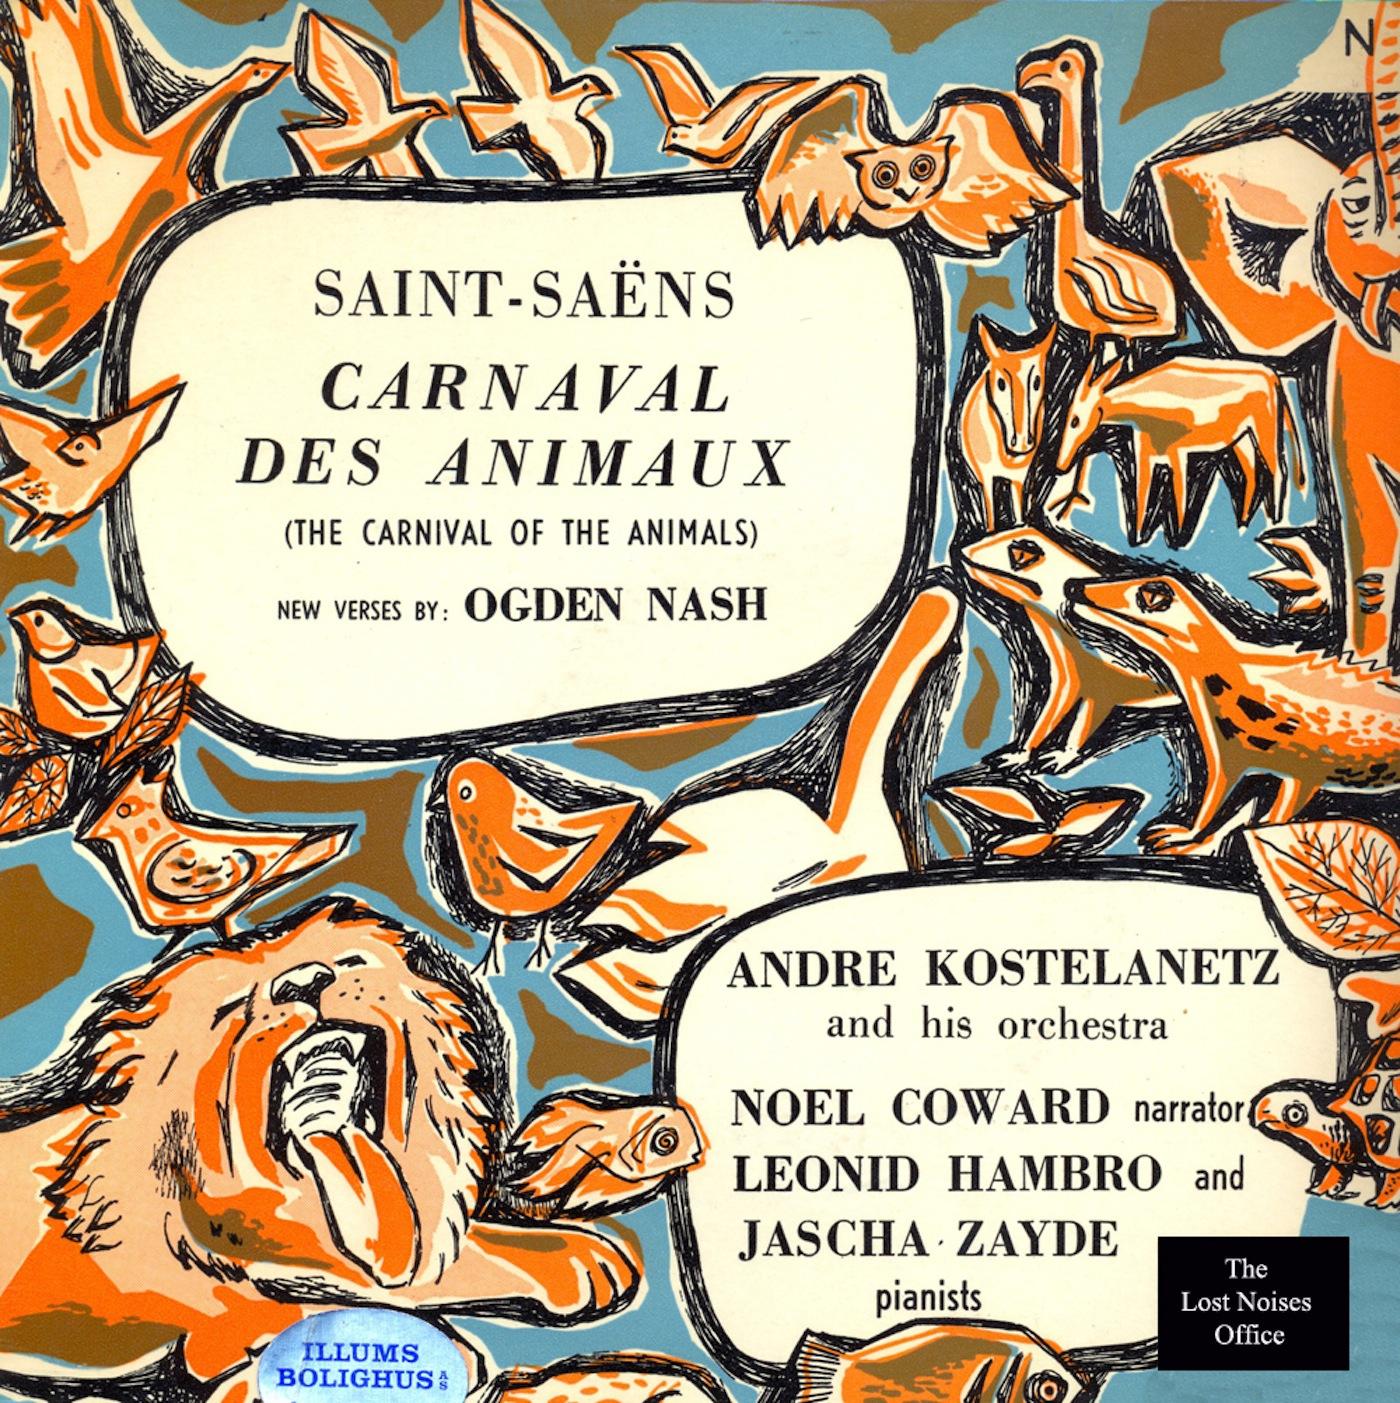 The Carnival of the Animals: Camille SaintSa ns, With New Verses by Ogden Nash, Narrated by Noel Coward